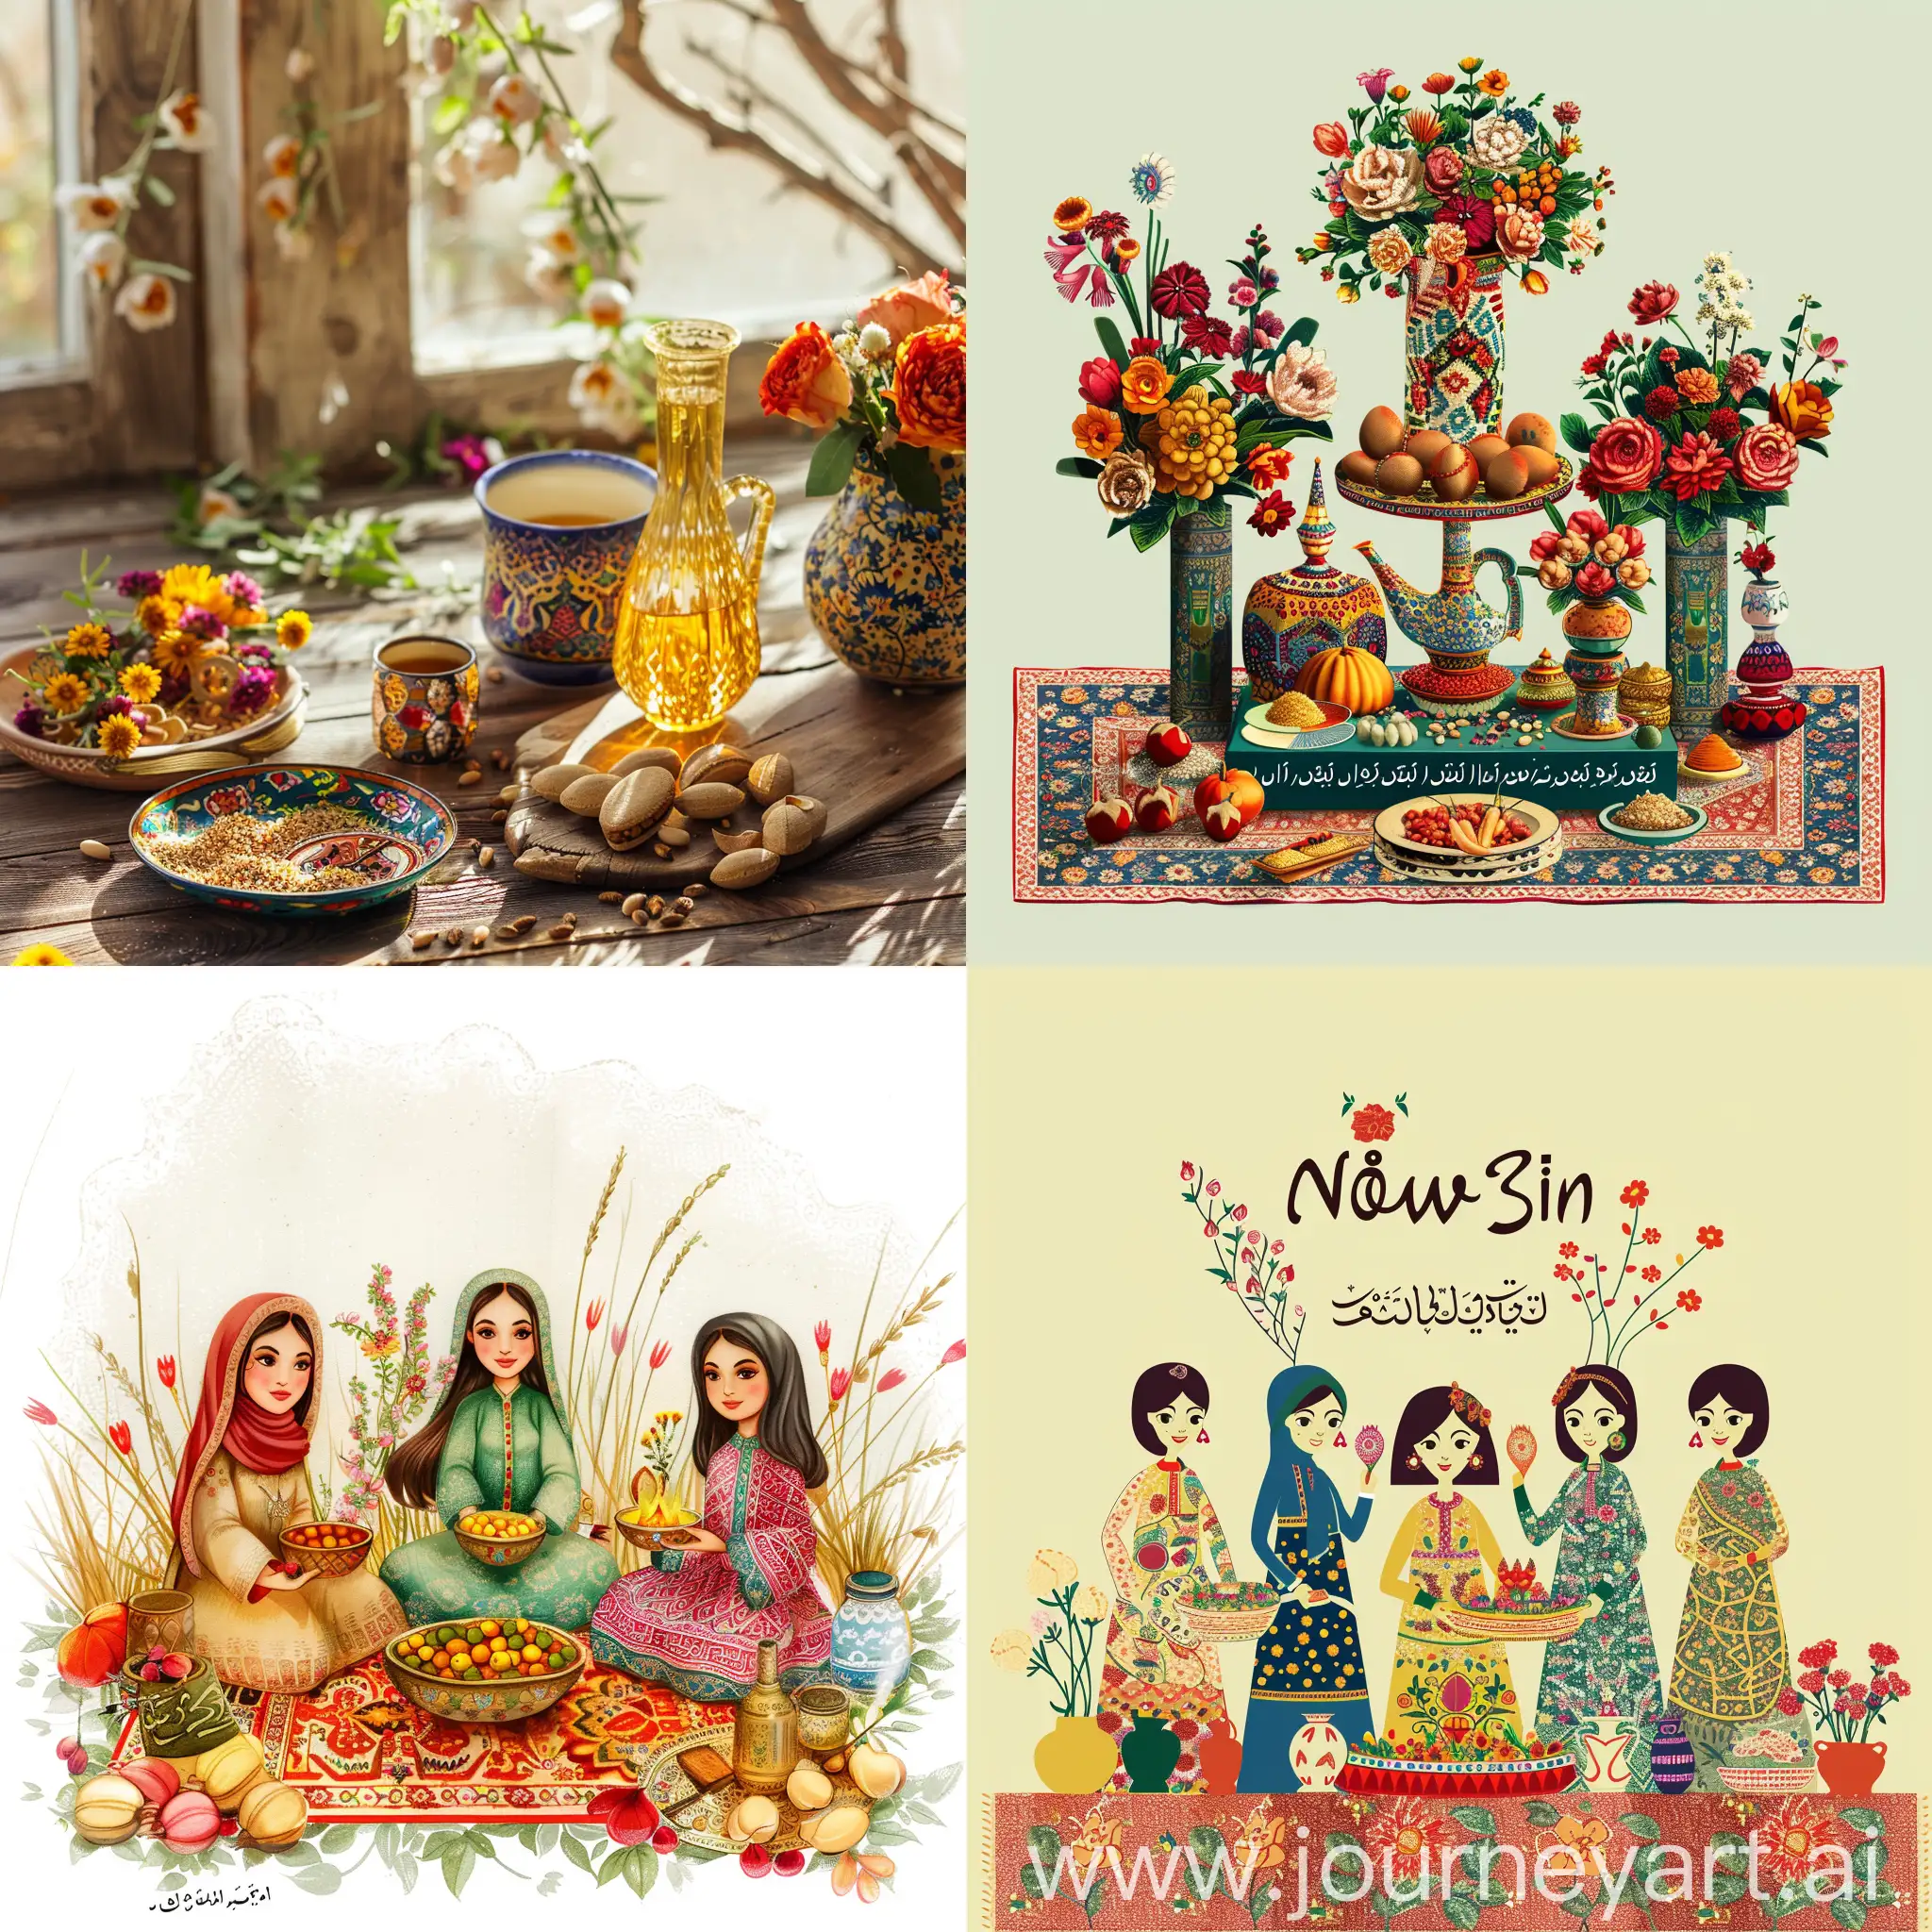 a nowruz(persian new year celebration) celebration, add the persian patterns to pic and aslo the elements of "haft-sin" in the picture; also leave a free space for typing under the elements